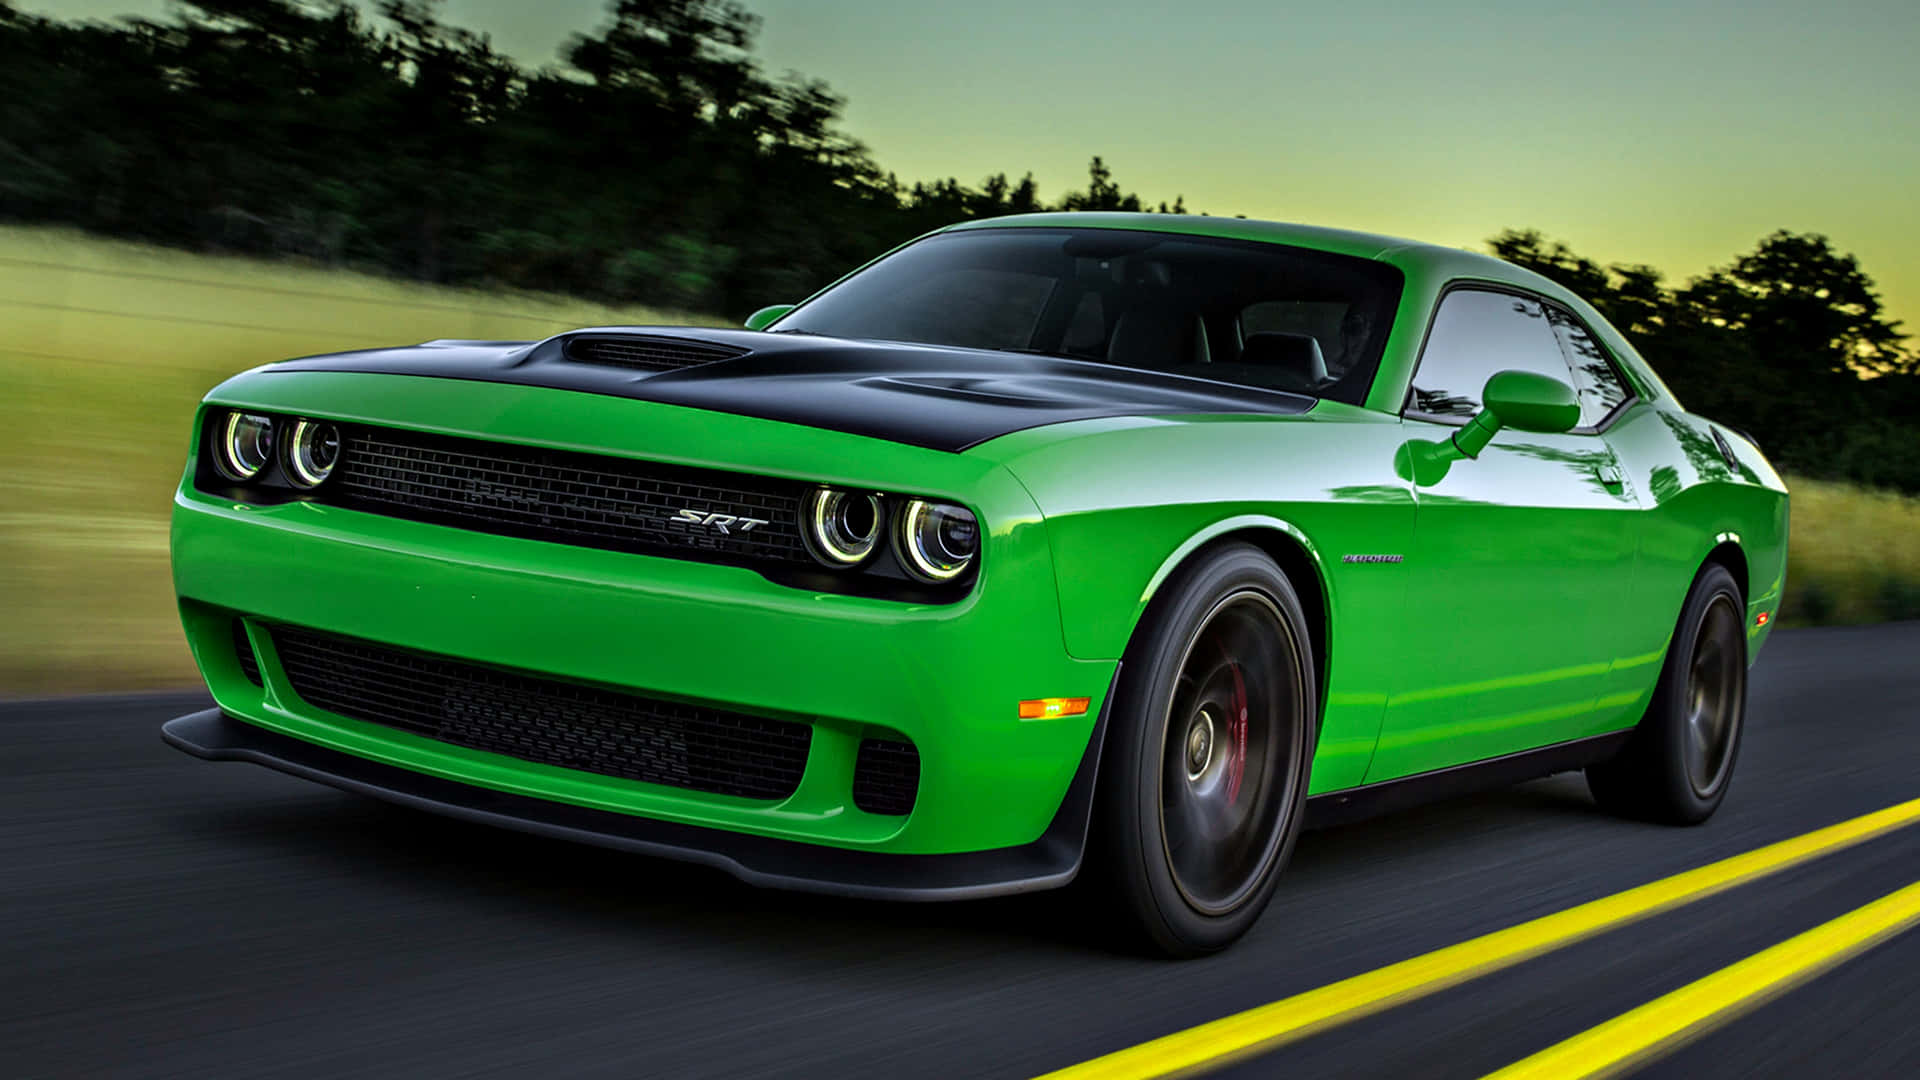 The Green Dodge Challenger Is Driving Down The Road